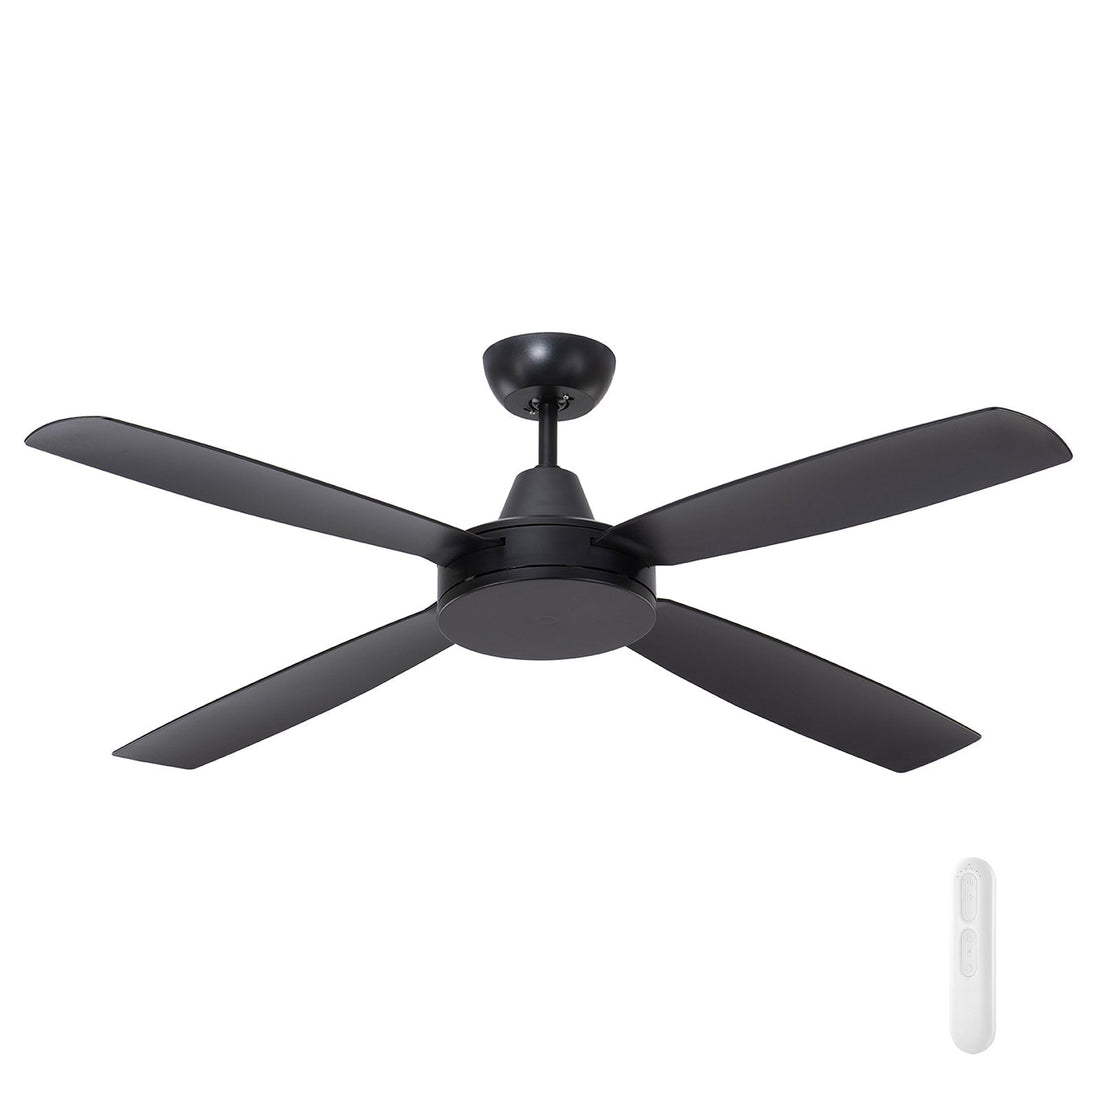 Nemoi DC Ceiling Fan with Remote Mercator